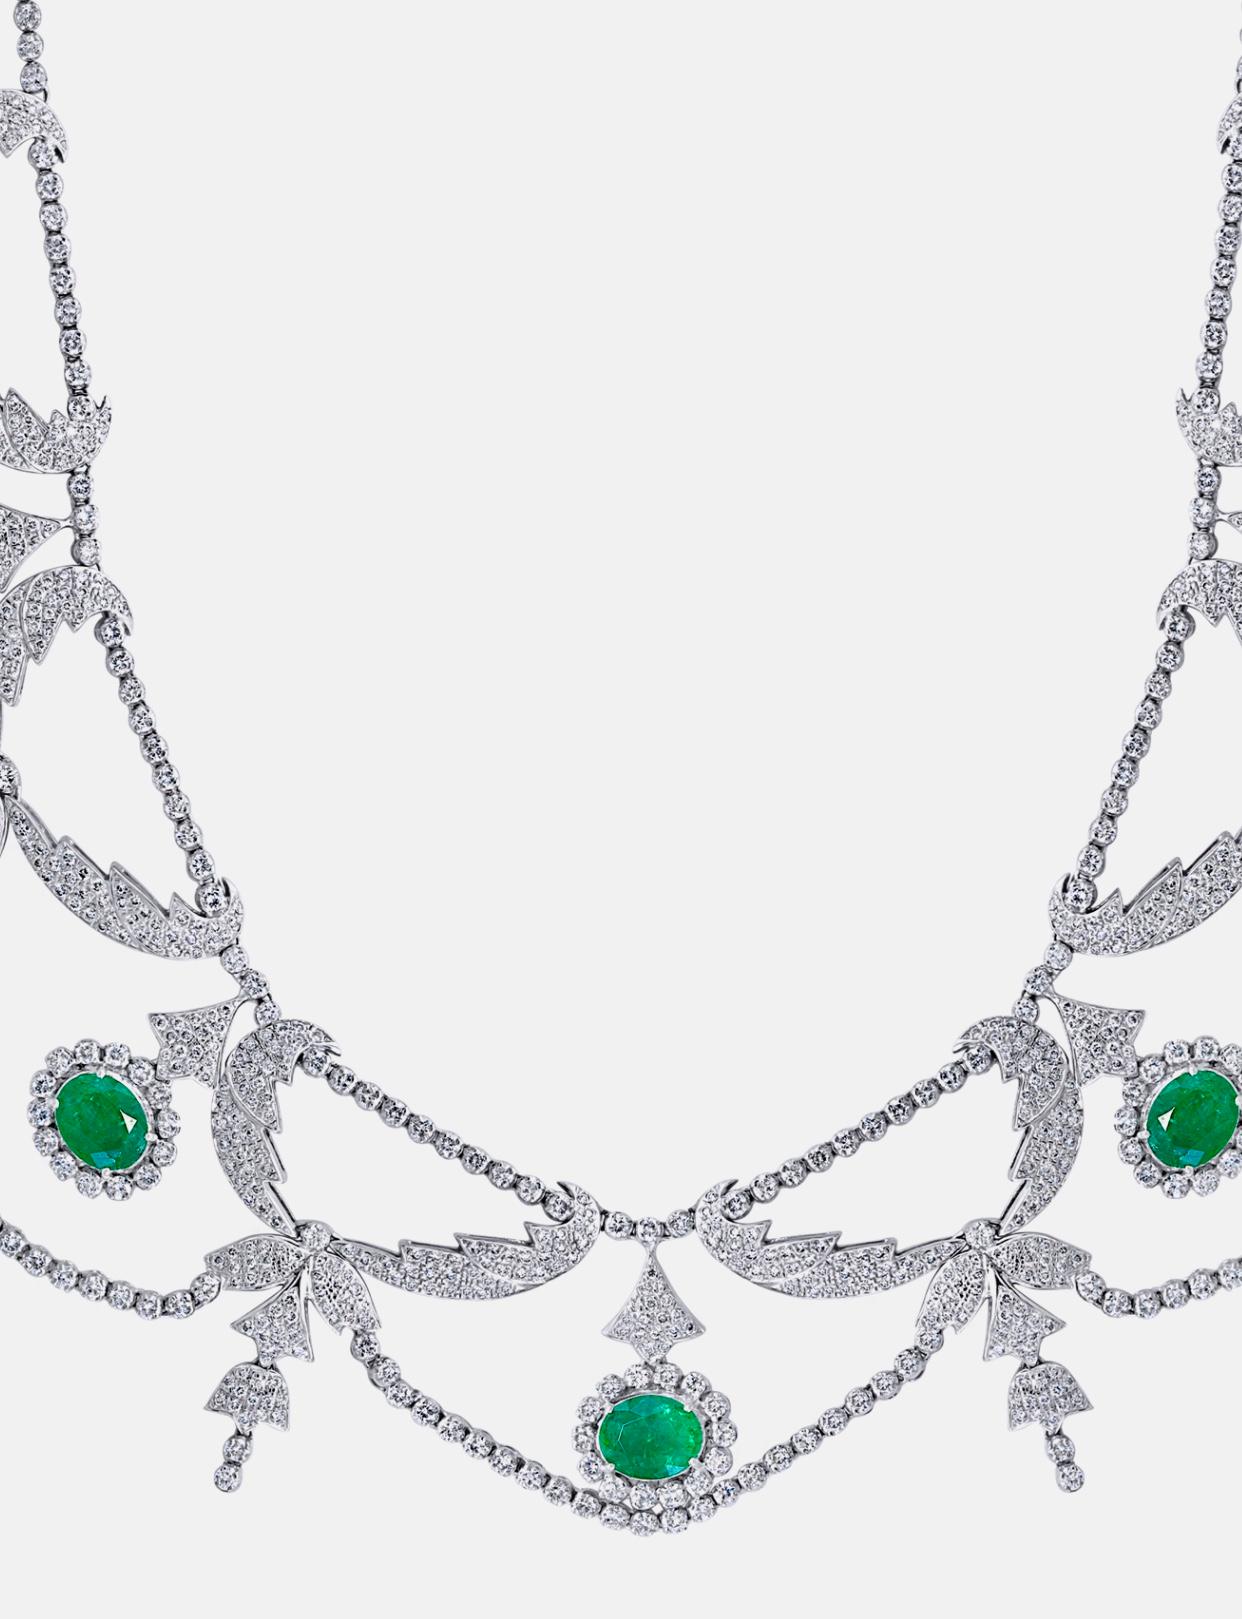 Oval Natural Zambian Emerald & Diamond Fringe Necklace and Earring Bridal Suite For Sale 2